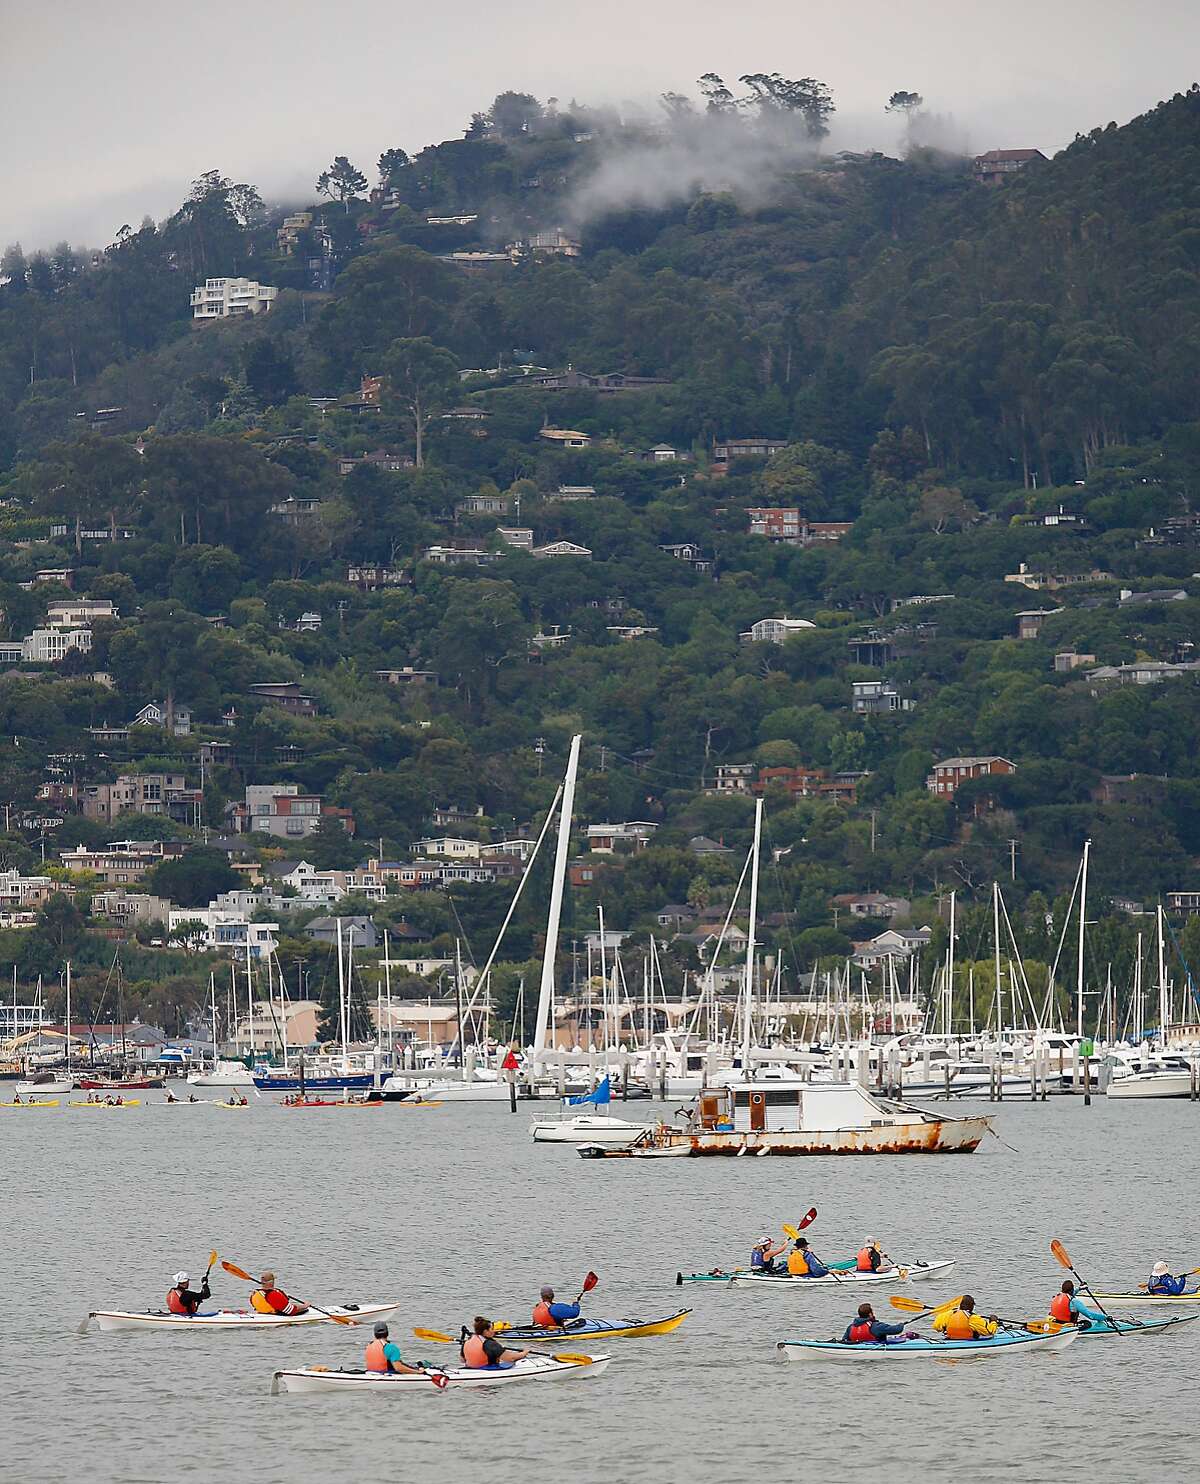 Fog on the Marin hills as kayakers maneuver the bay on Friday, August 4, 2017, in Tiburon, Calif.